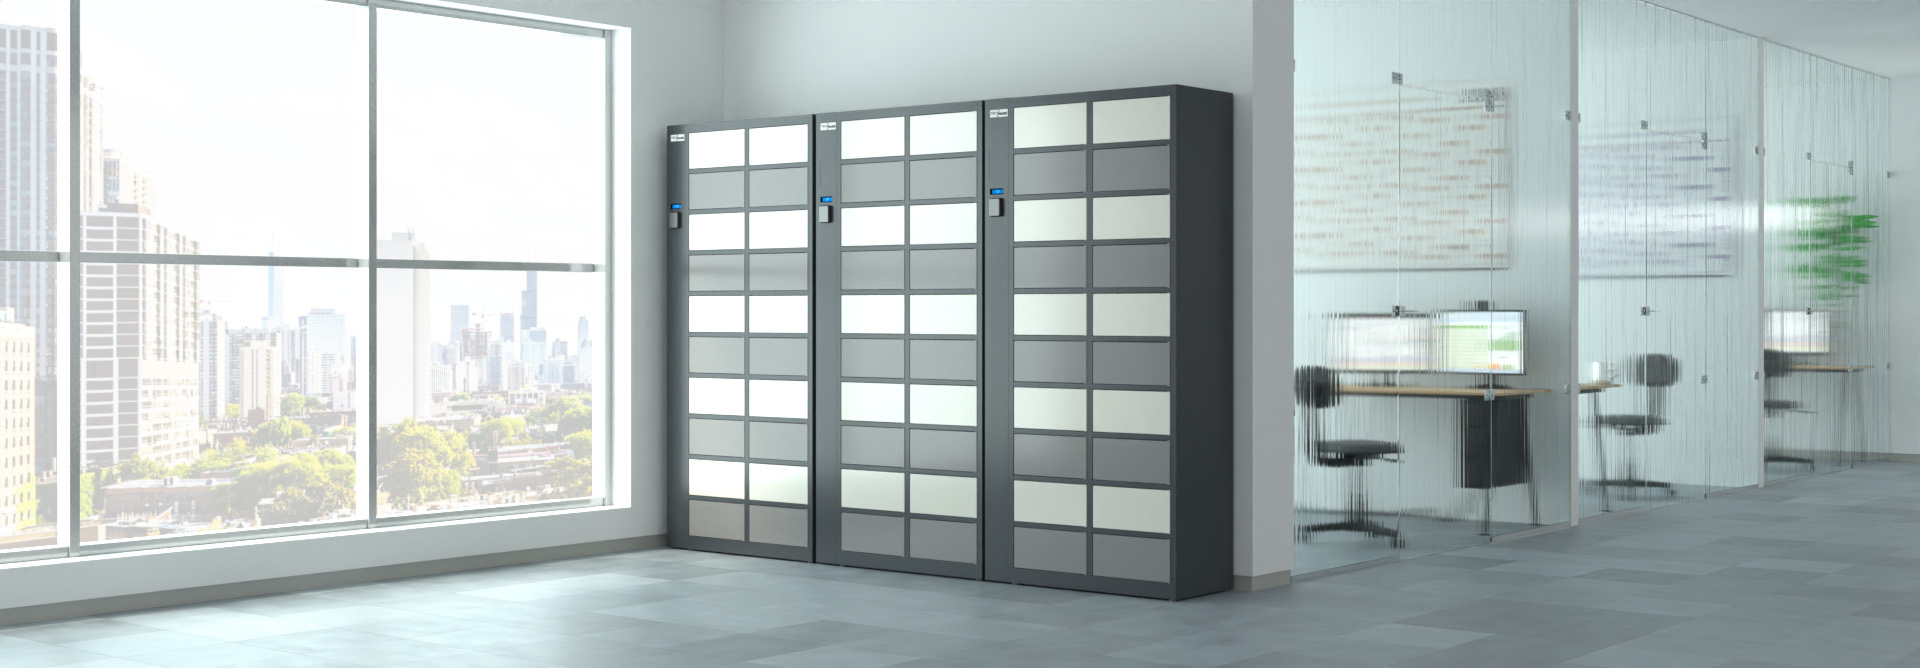 TECHCODE RFID multi-compartment cabinets in the S.2.1 system will fit seamlessly into any interior.